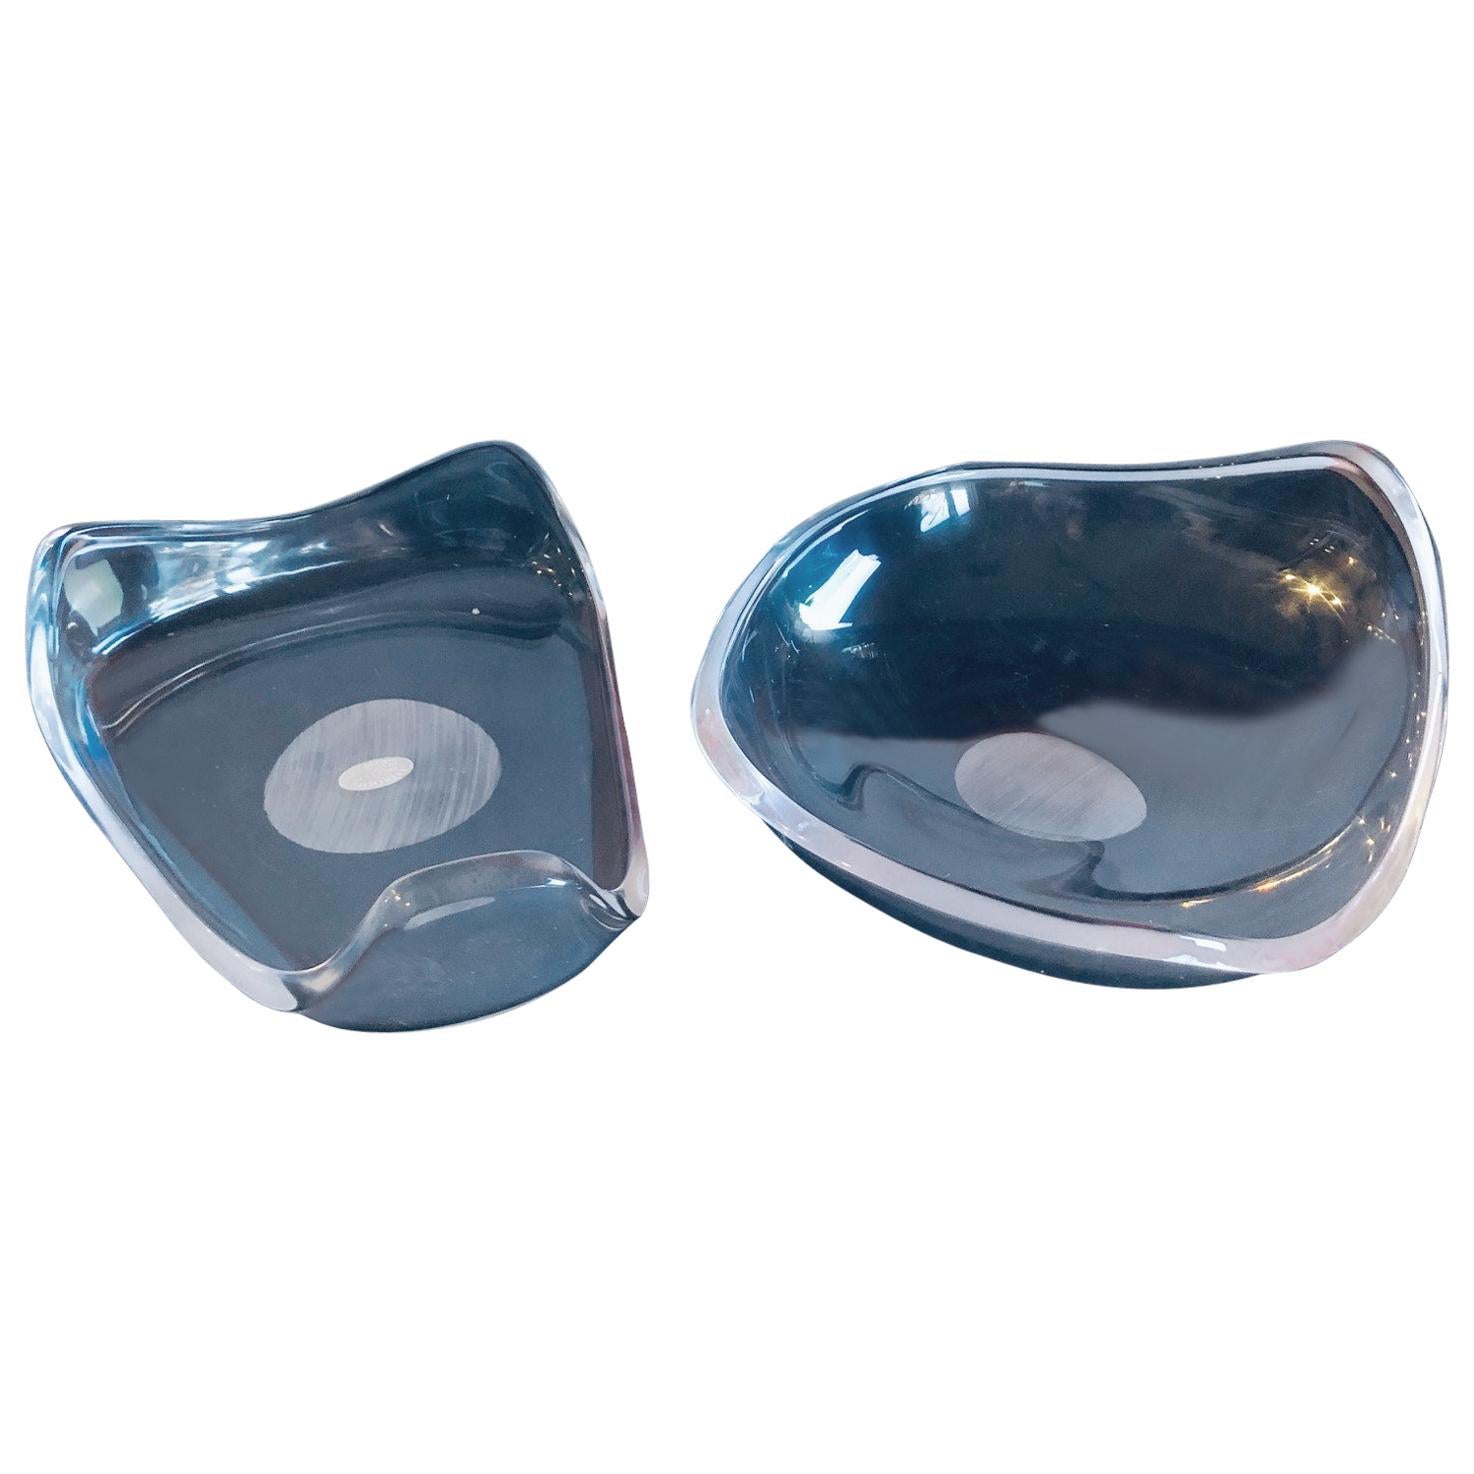 Pair of Freeform Sculptural Acrylic Bowls by Astrolite / Ritts Co.